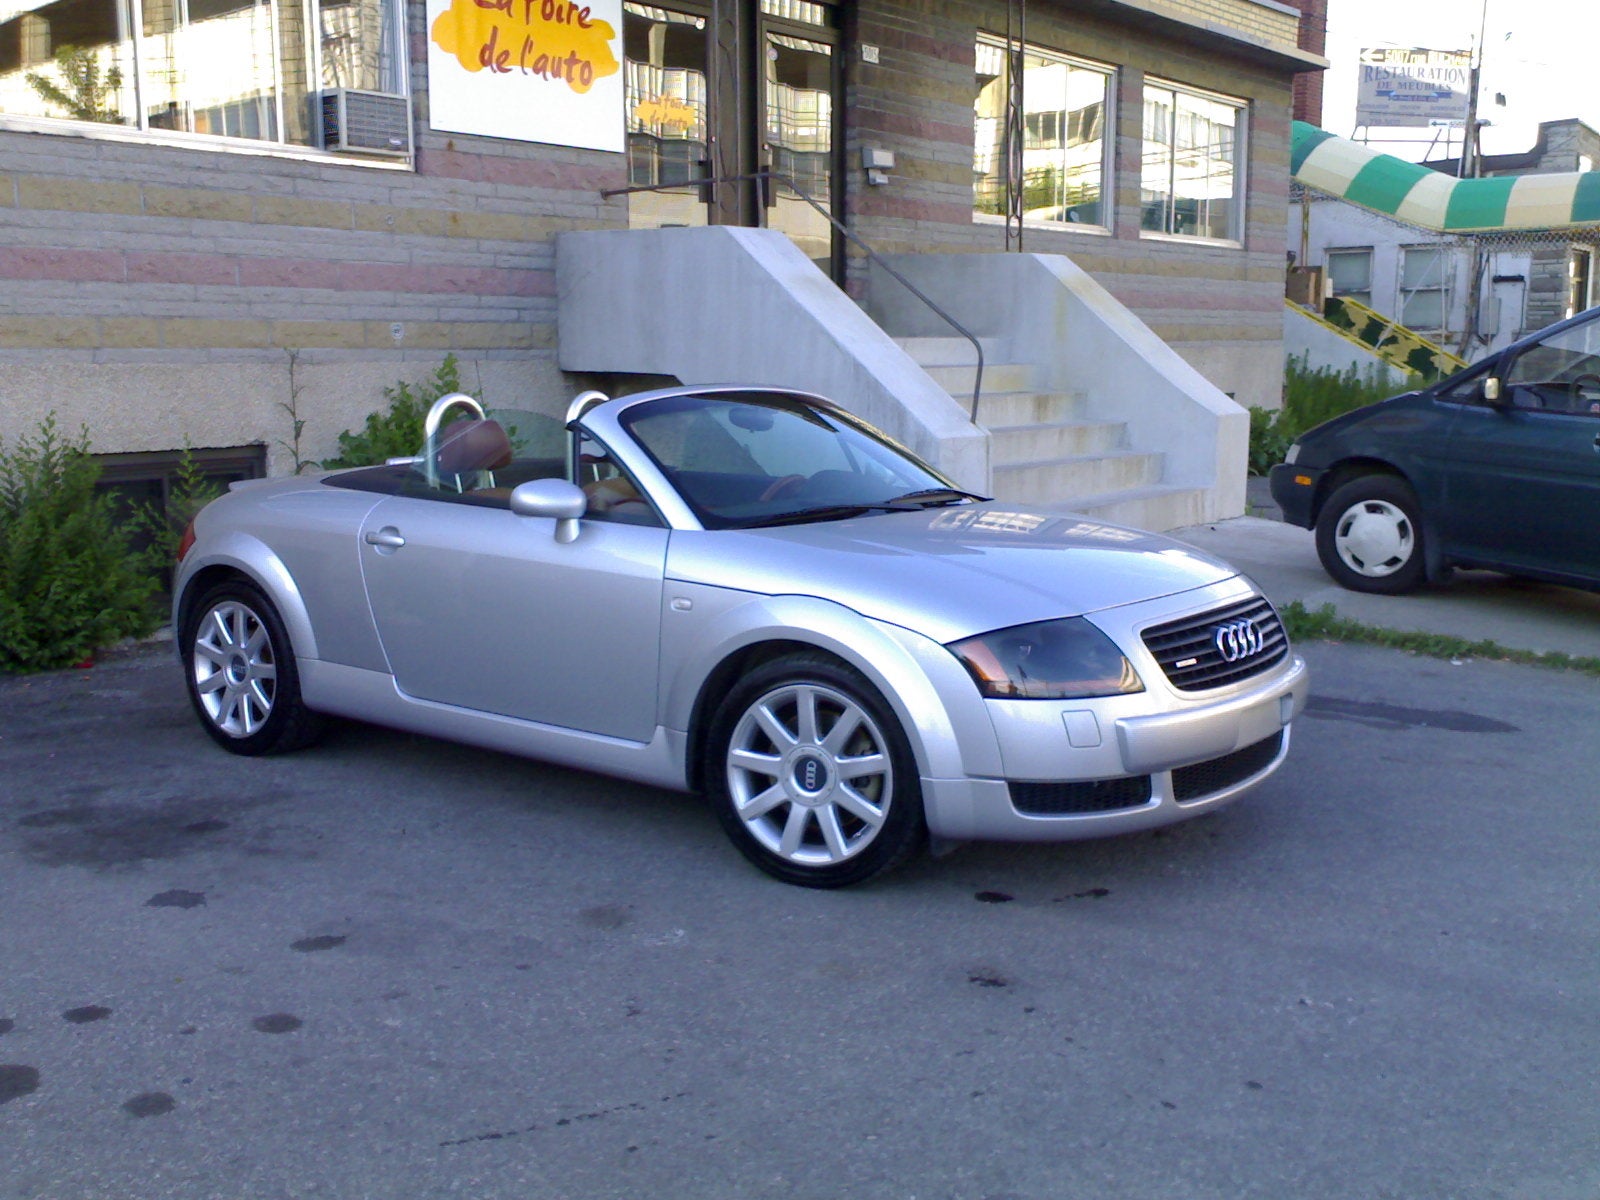  Audi on Audi Tt Roadster Quattro Picture View Garage Meshan Used To Own This